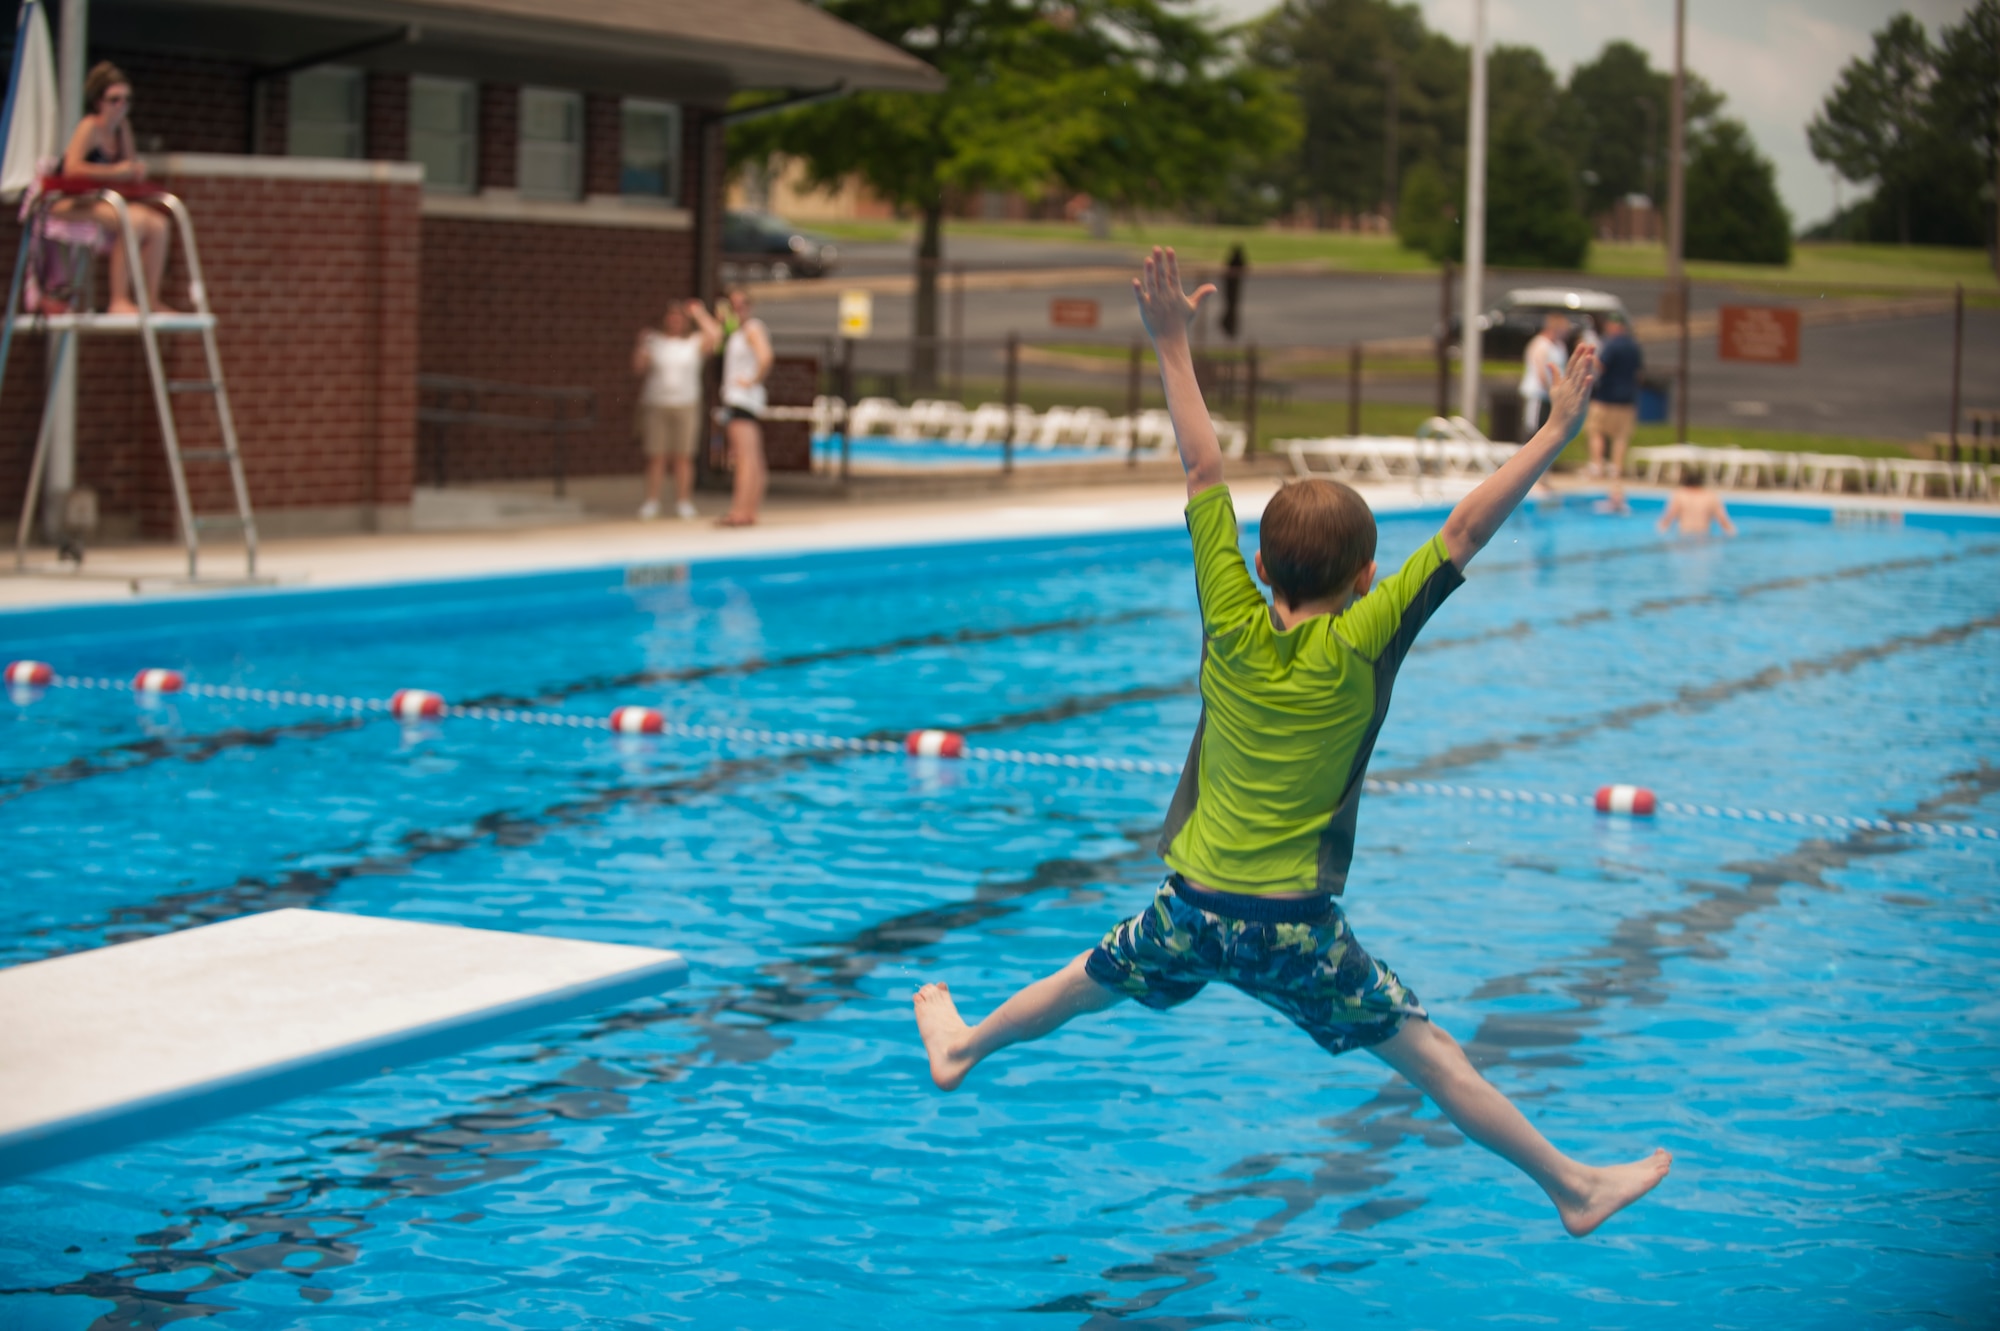 Coleman jumps into the base pool on opening day June 6, 2015, at Little Rock Air Force Base, Ark. Swimmers have the opportunity to take a jump from the diving board or enter the pool from the water slide. A day-pass costs $3, and season passes for single Airmen are $75 and for families are $125. (U.S. Air Force photo by Senior Airman Scott Poe)